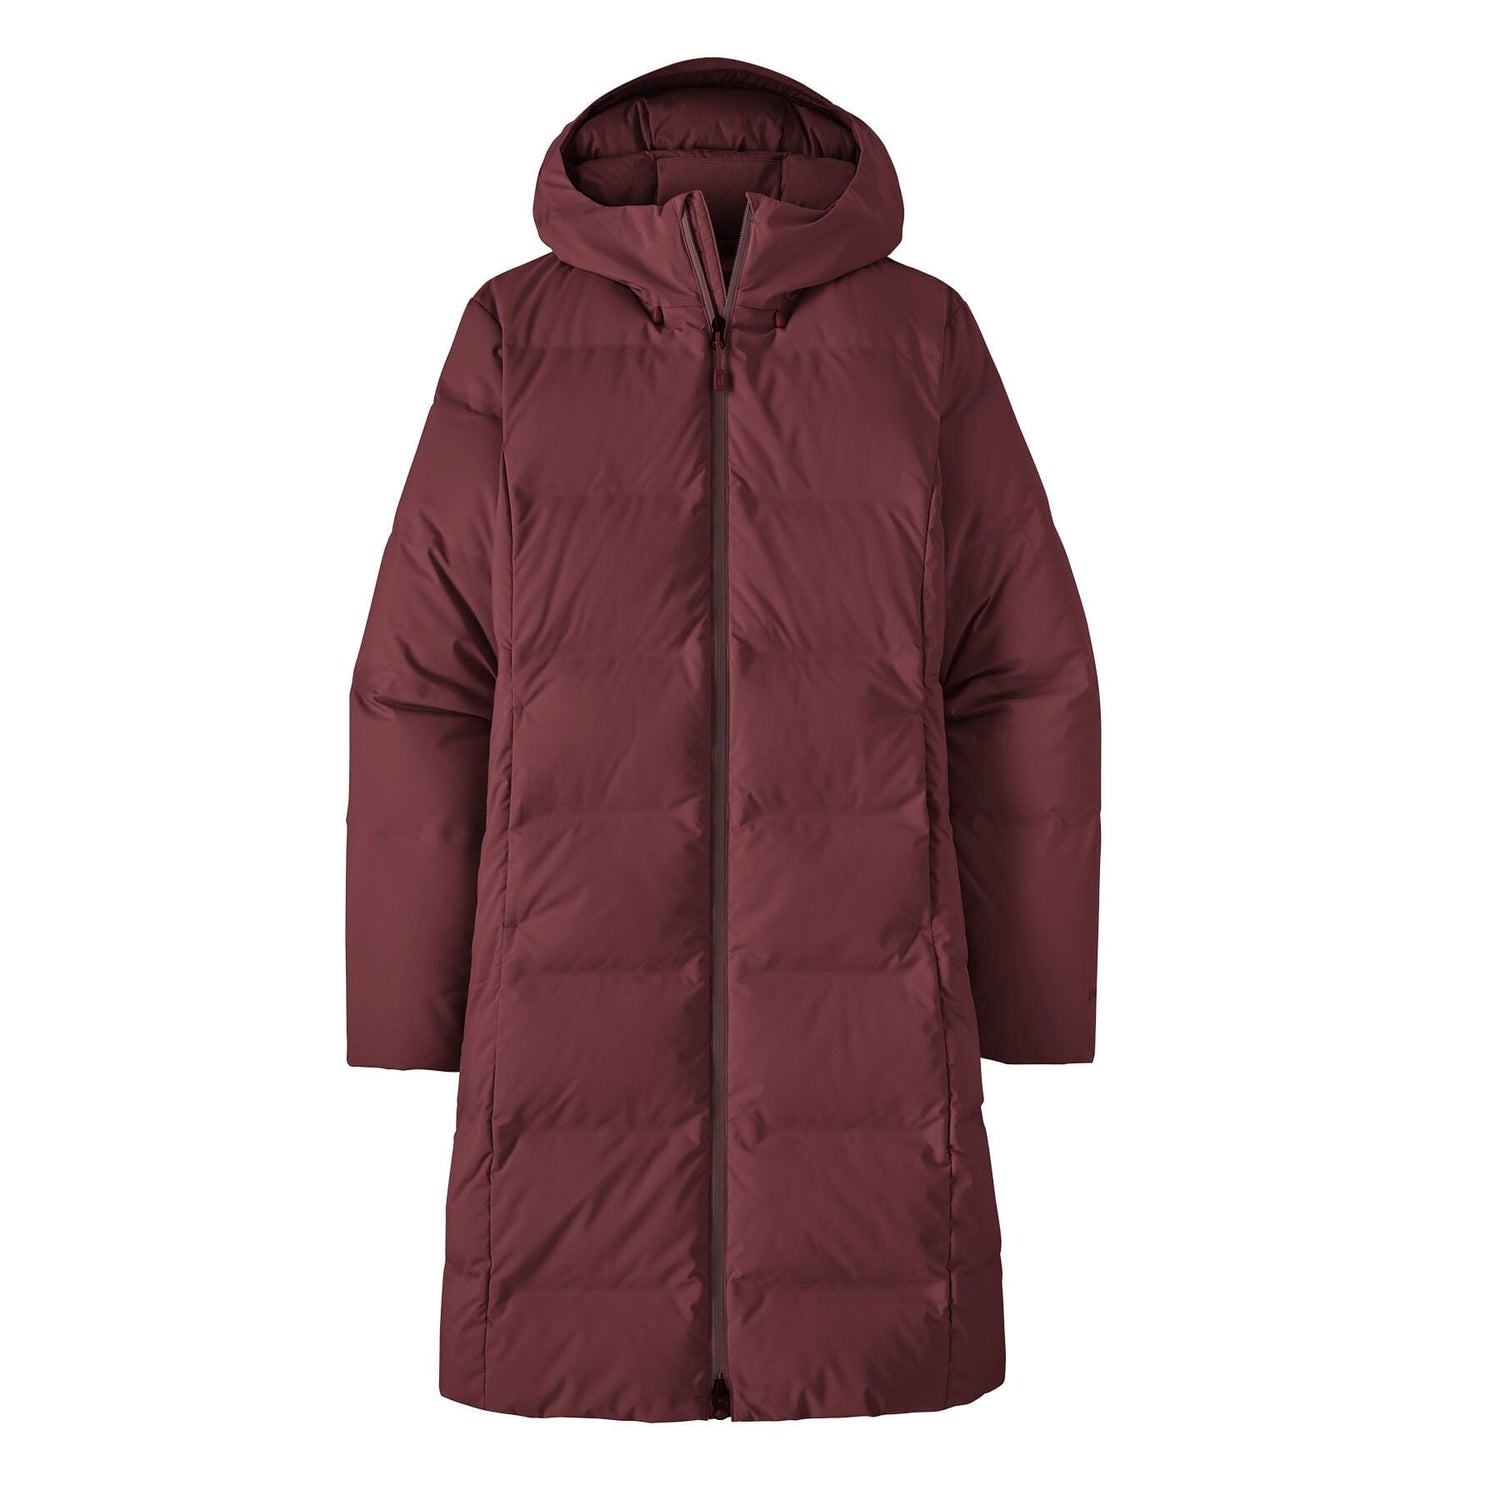 Patagonia - W's Jackson Glacier Parka - Recycled Down / Recycled Polyester - Weekendbee - sustainable sportswear